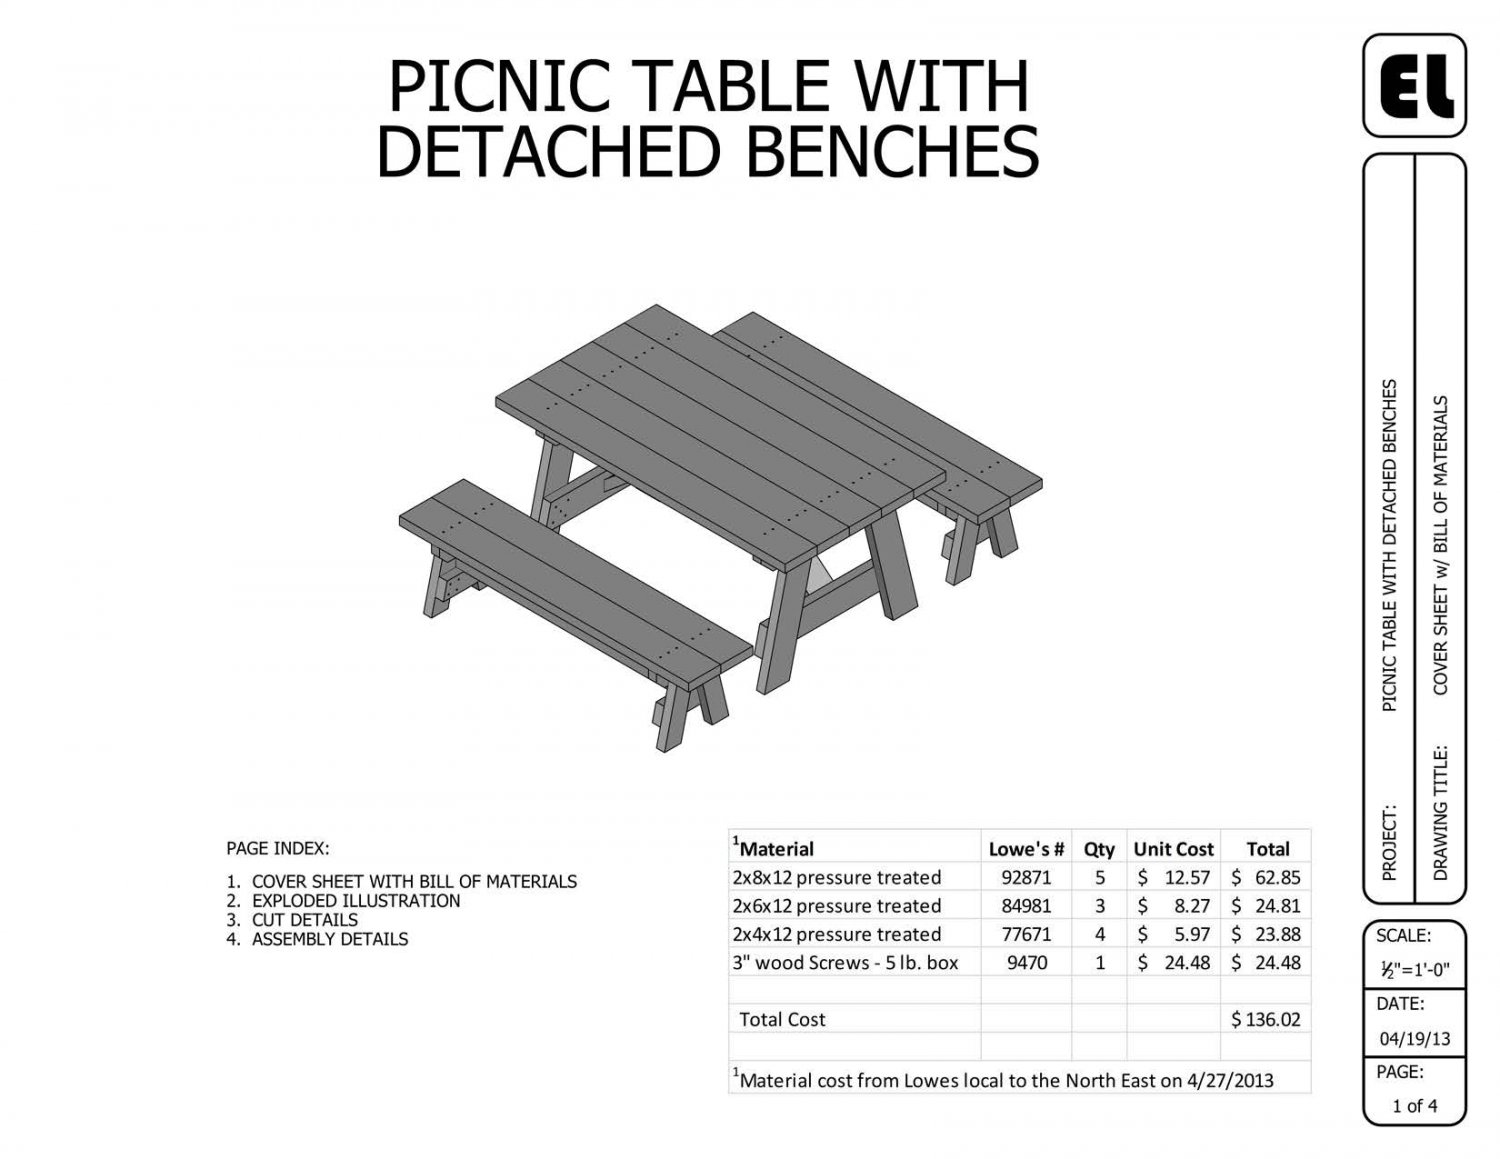 6' Picnic Table and Benches Building Plans Blueprints DIY ...